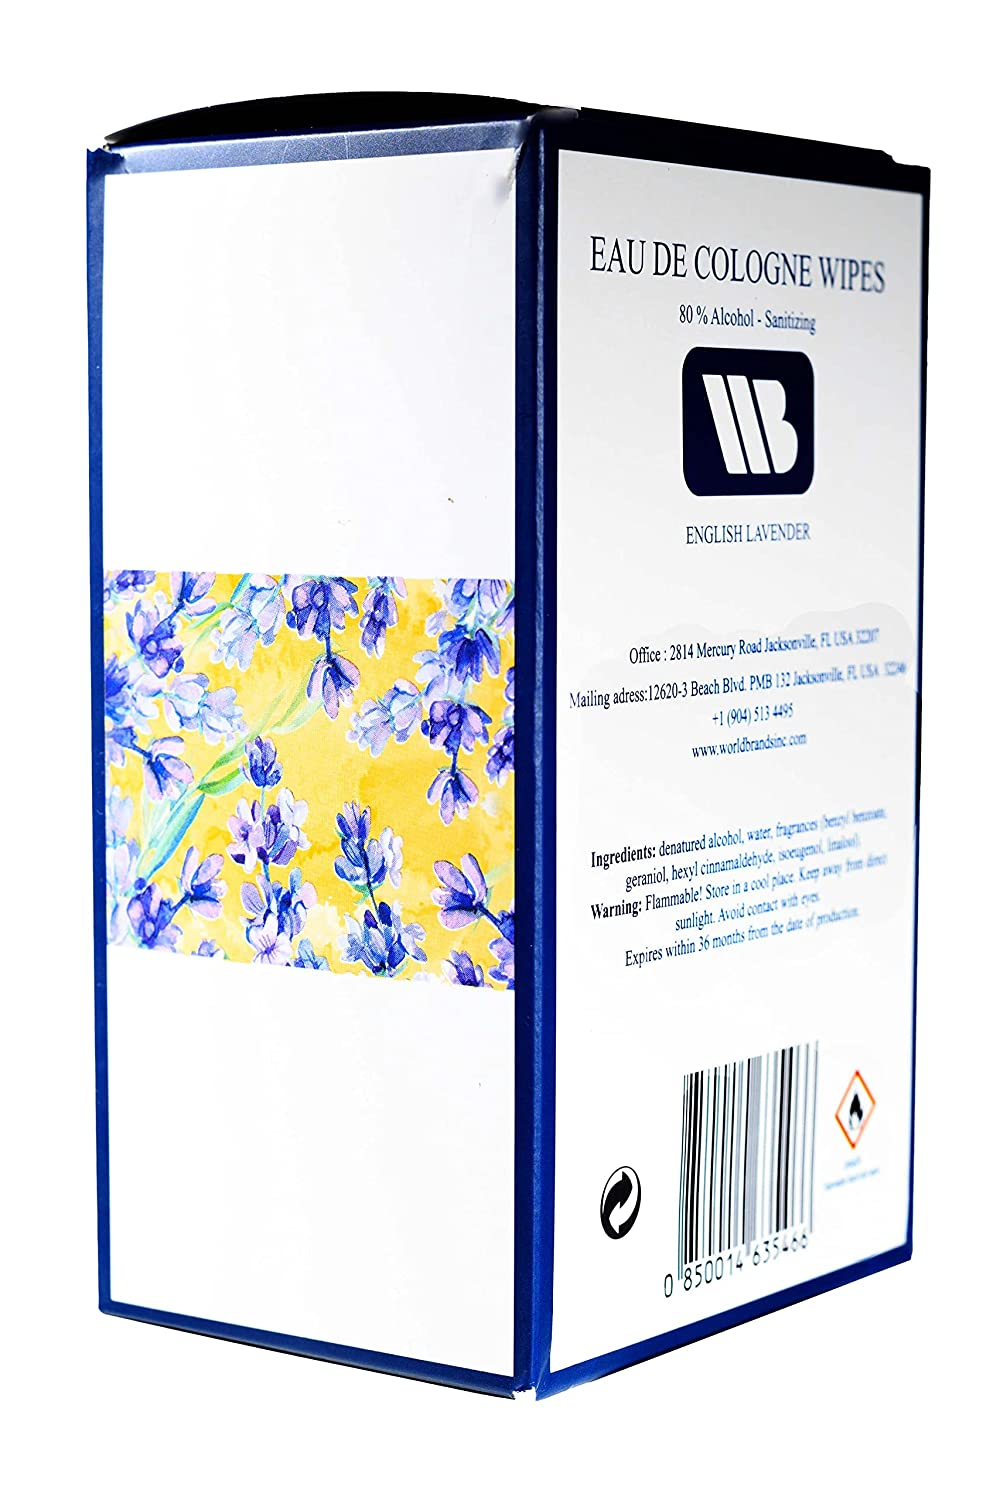 World Brands Eau the Cologne Sanitizing Wipes (English Lavender), 8X8 Inch